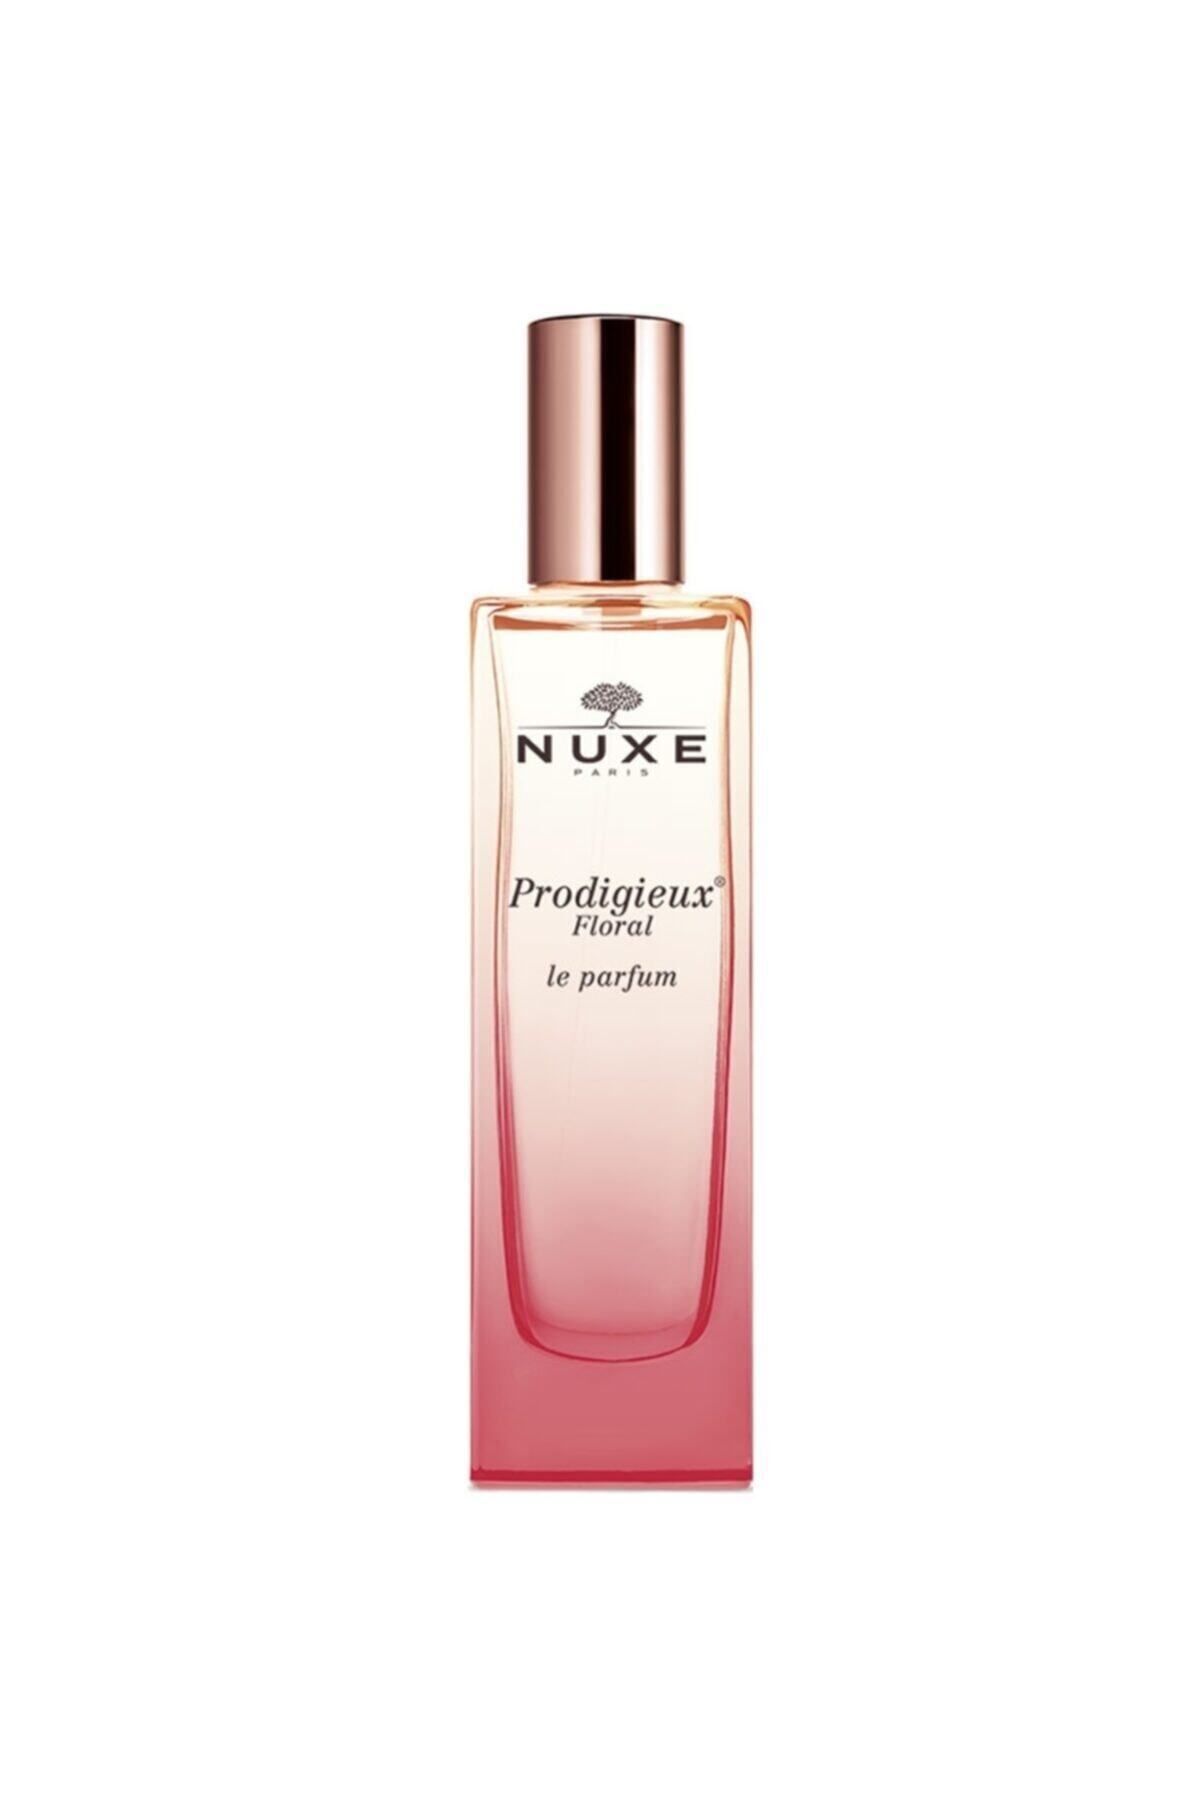 Nuxe EDP İNTENSE SCENT WOMEN'S PERFUME WITH NATURAL INGREDIENTS 50 ML DEMBA3414